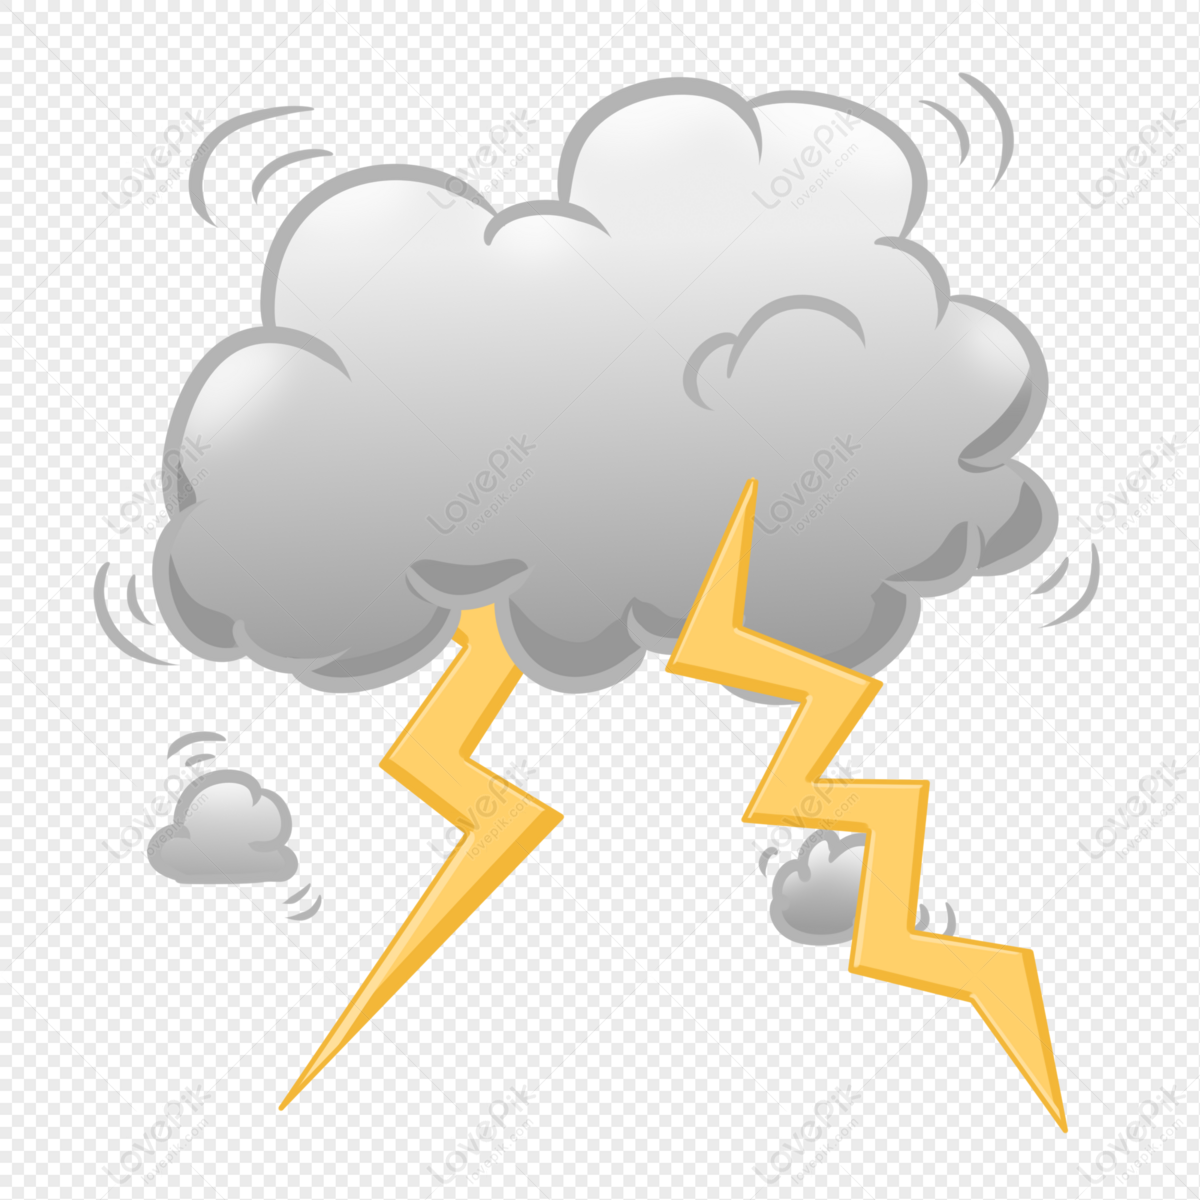 Thunder PNG Hd Transparent Image And Clipart Image For Free Download